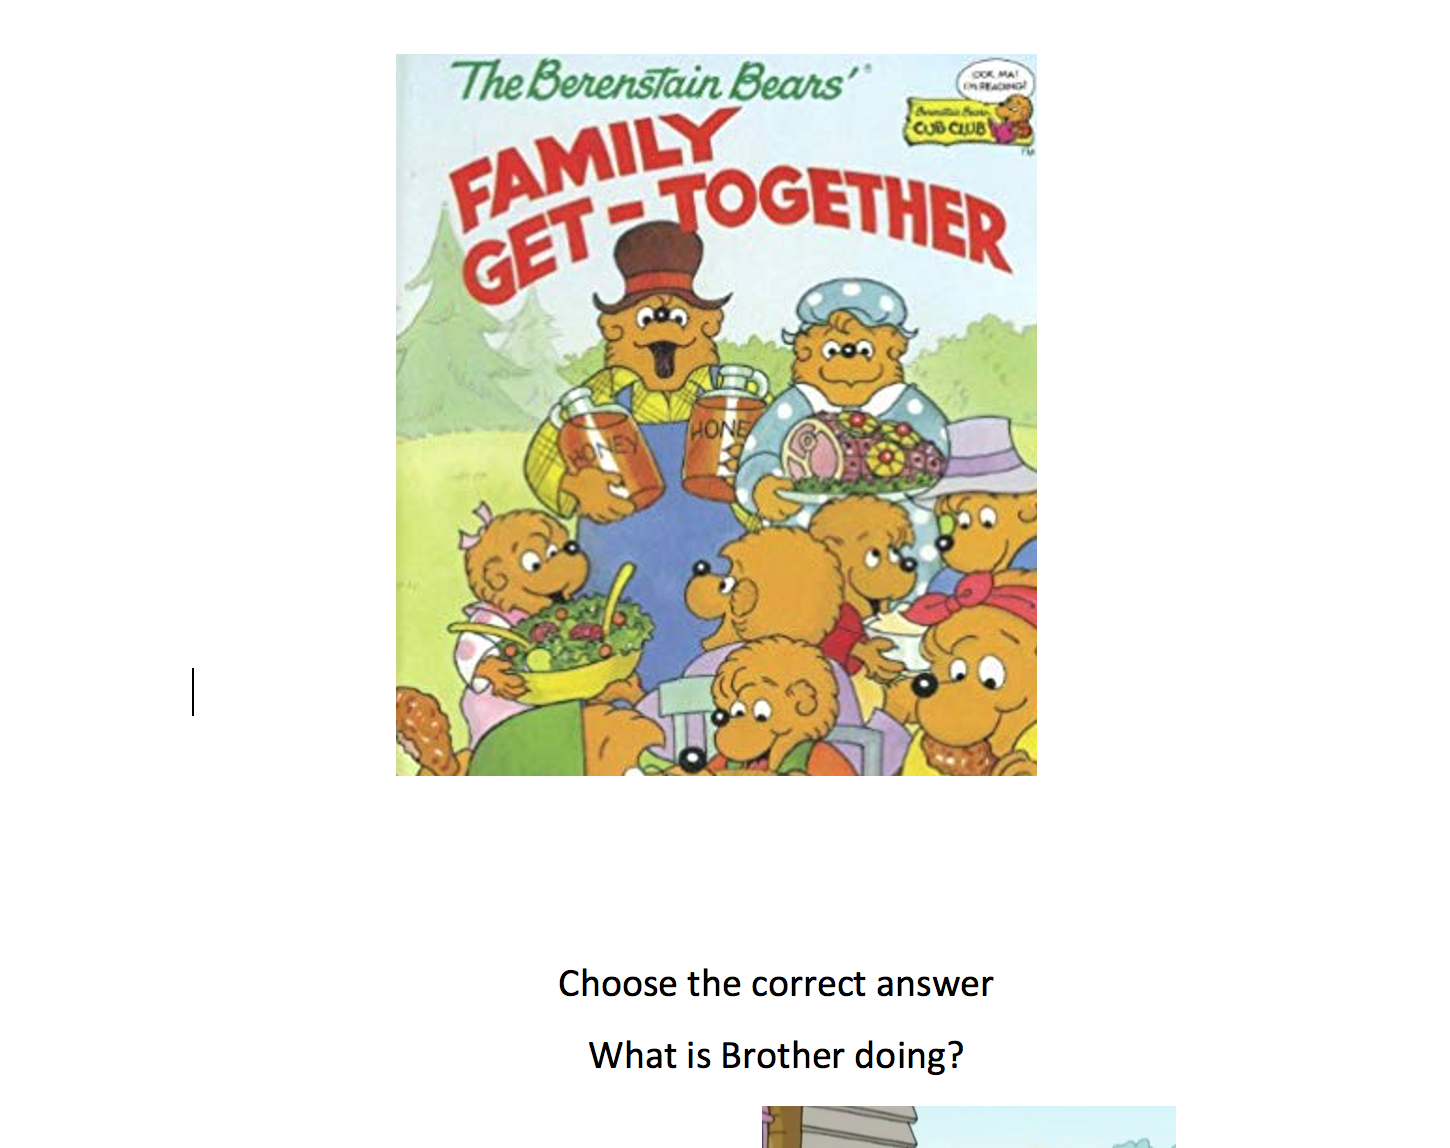 The Berenstain Bears Family Get-Together